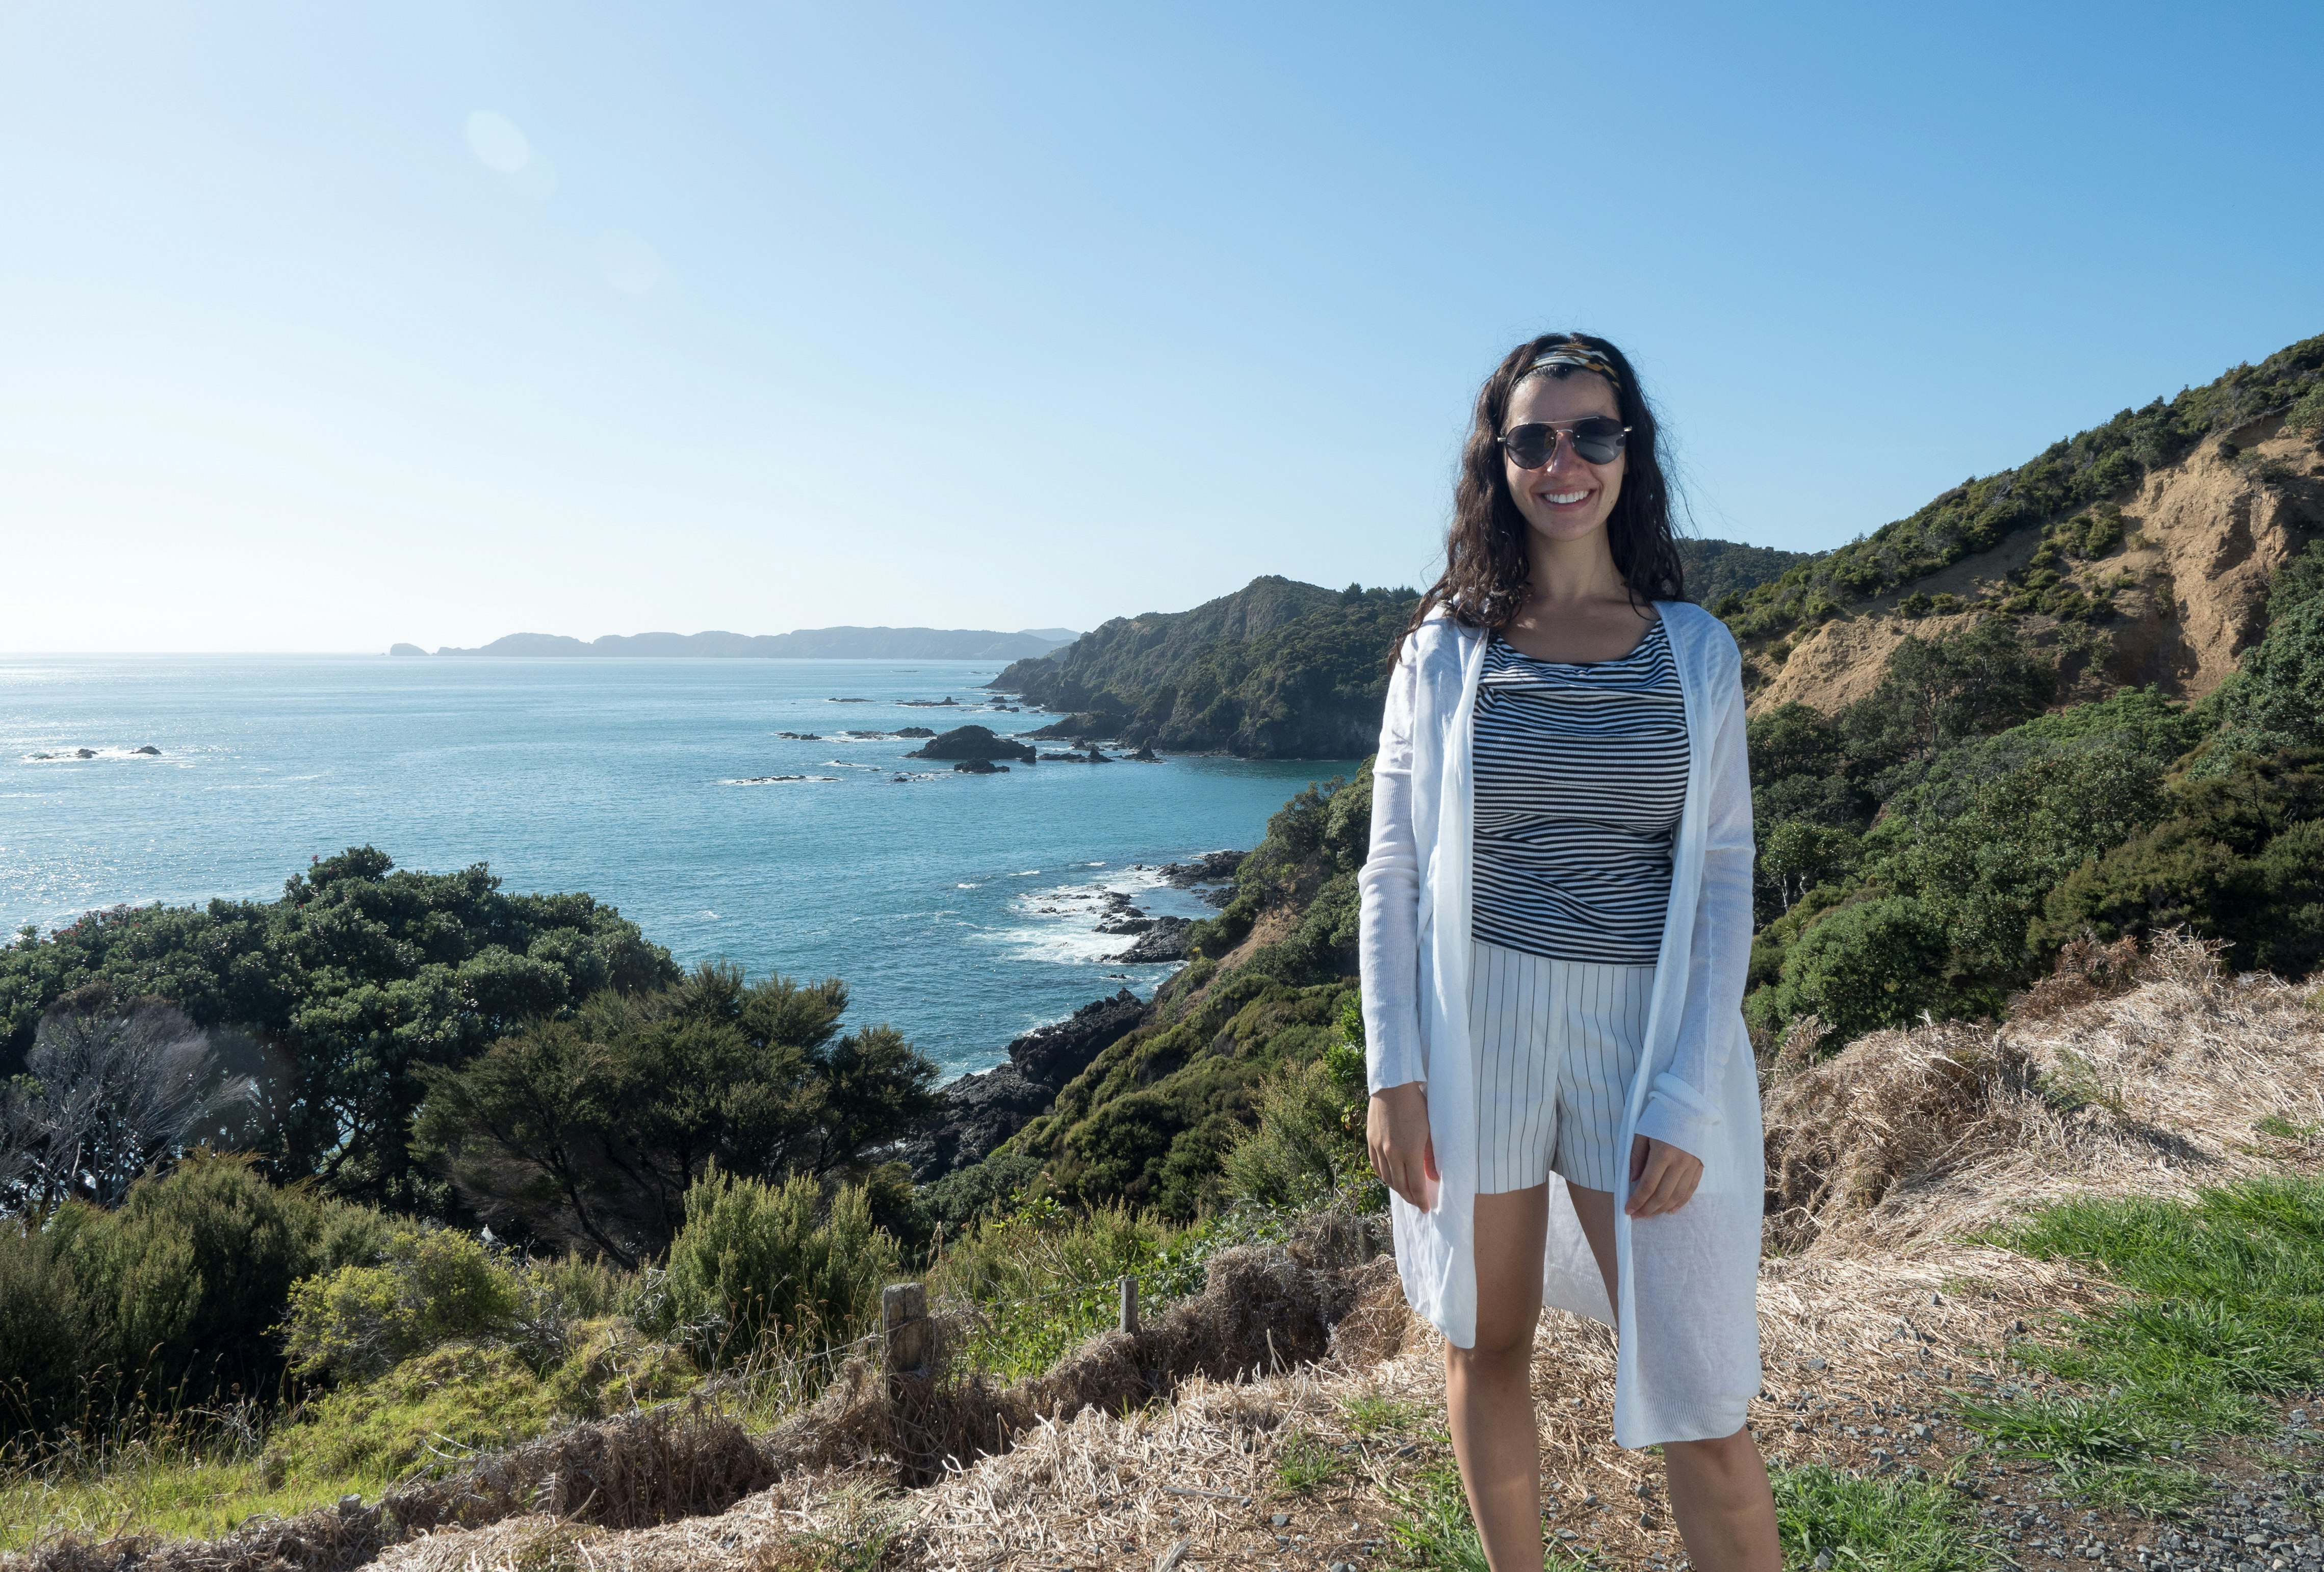 Caterina stands cliffside in Russell, North Island, New Zealand